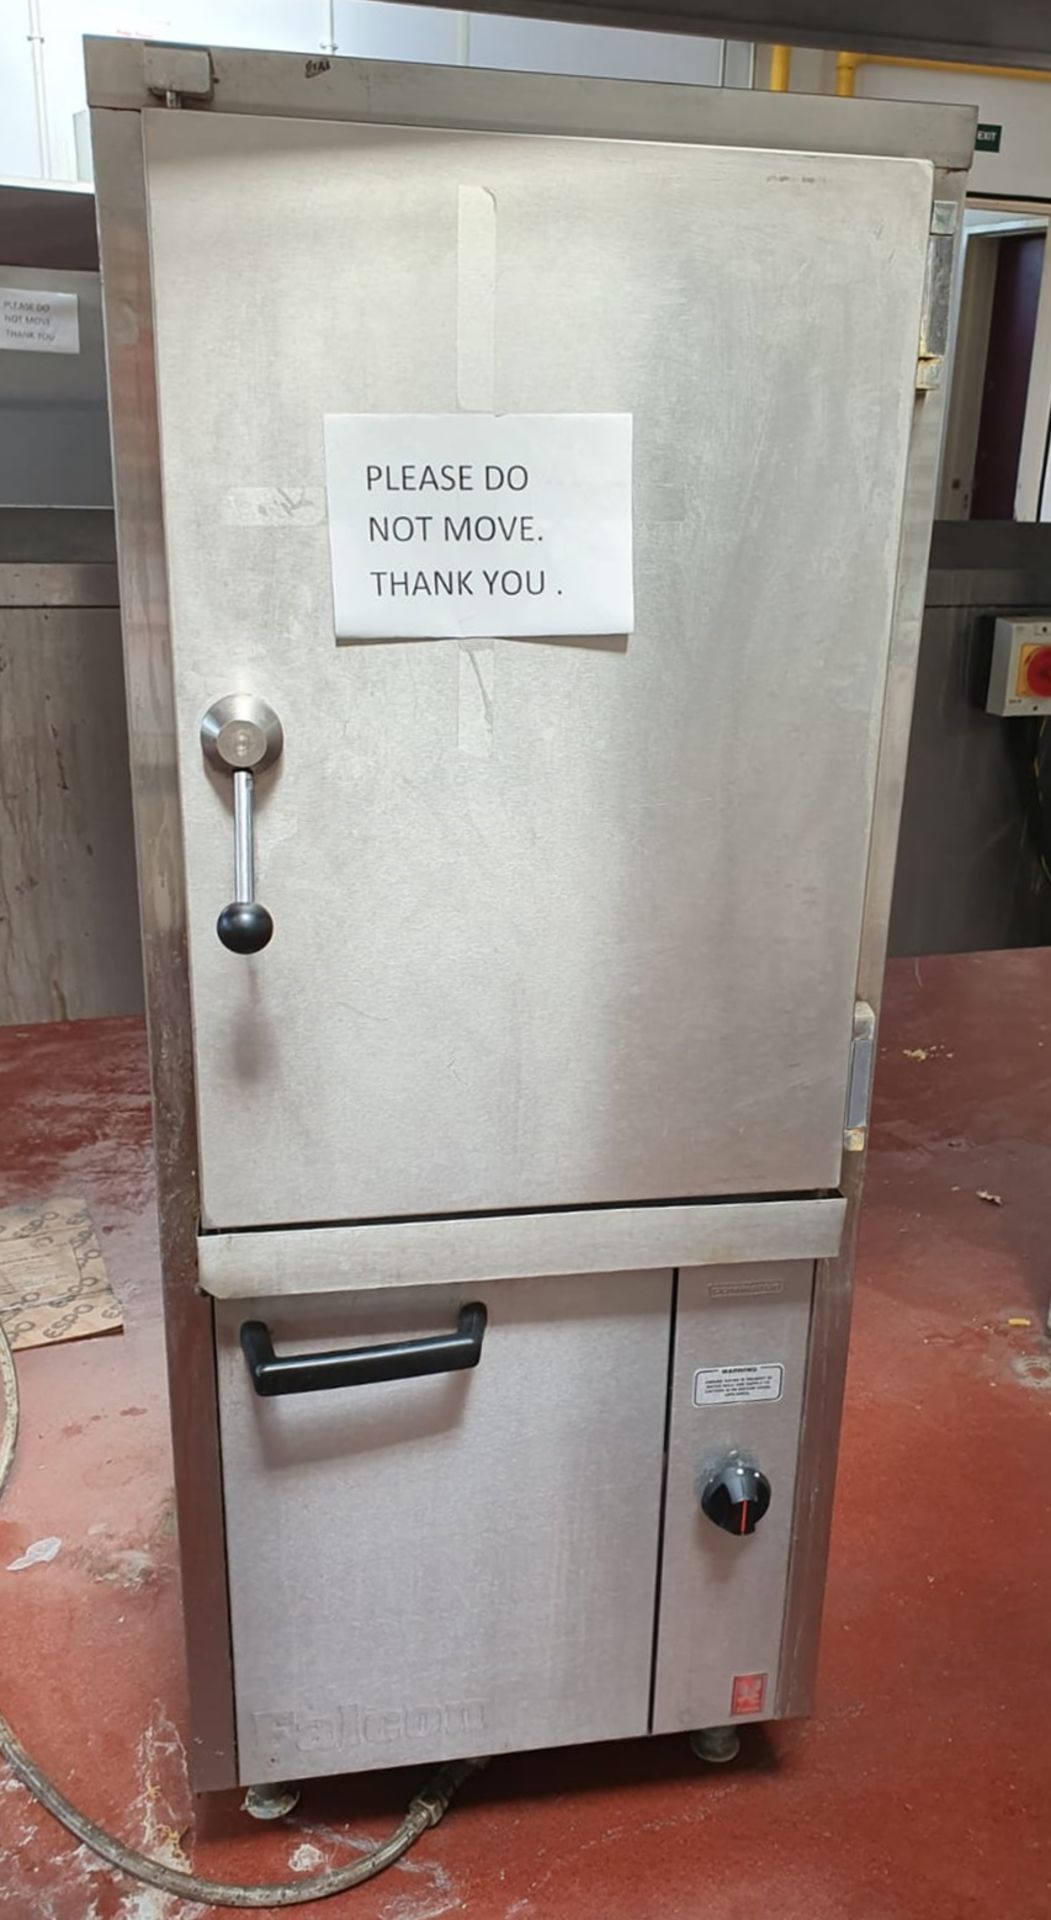 1 x Falcon Commercial Kitchen Steamer Oven - CL499 - Location: Borehamwood WD6Collections: This item